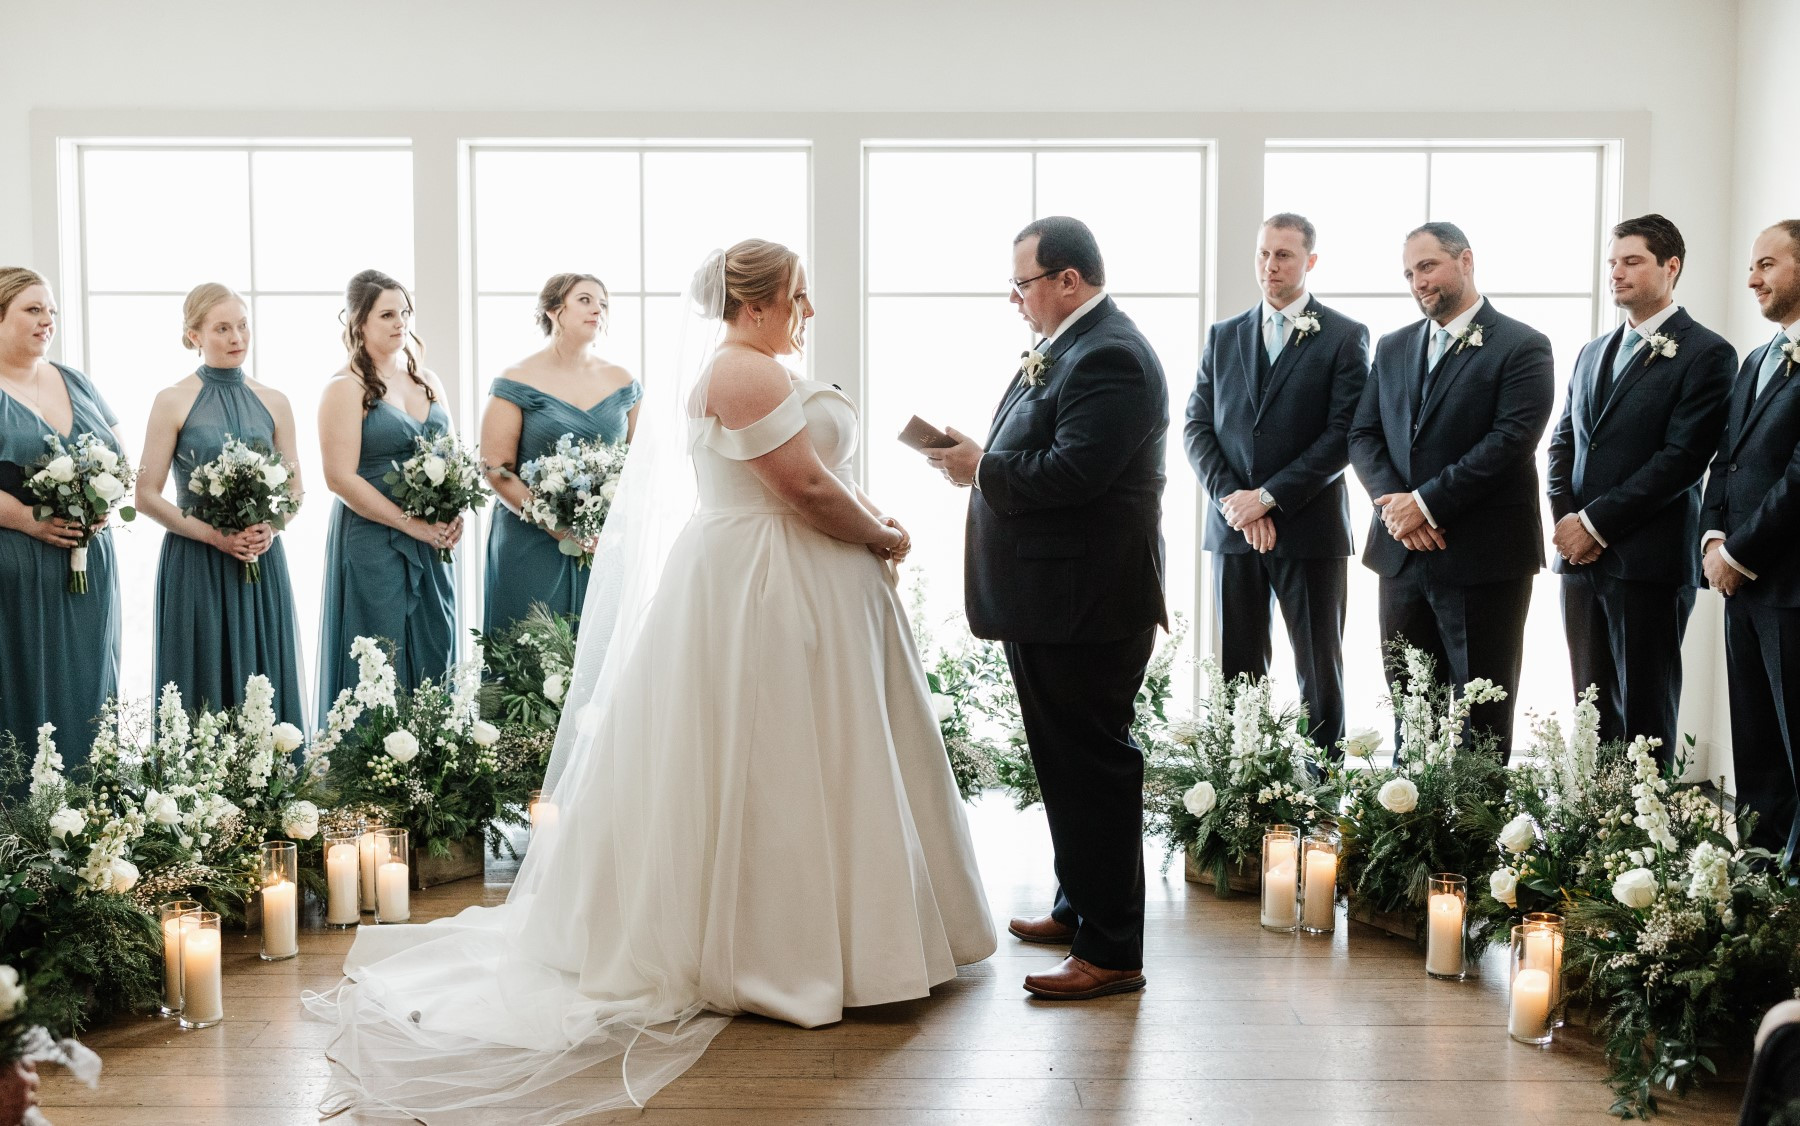 Loft floral ceremony site featuring green/white/blue floral arrangements, with bride and groom in front, and 3 groomsmen and 3 bridesmaids behind them